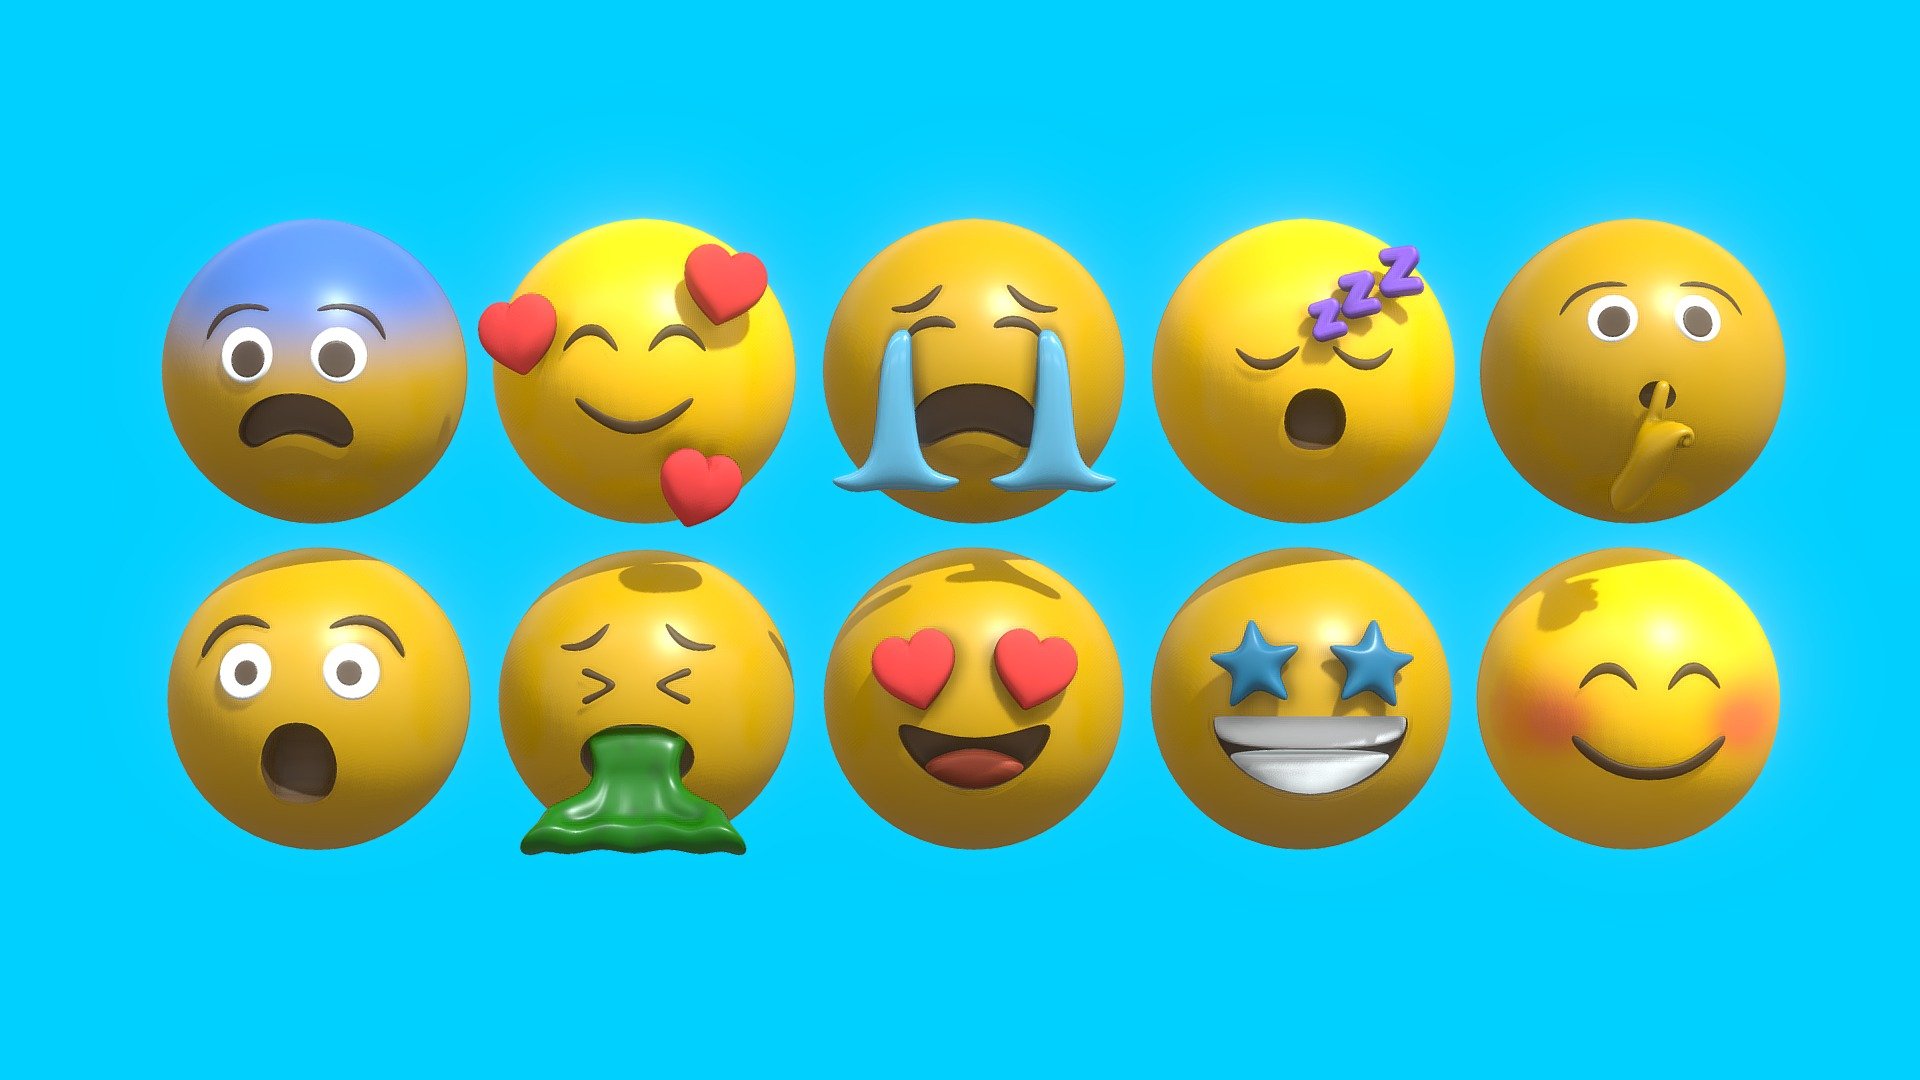 3D 10 Emoticon Yellow Ball Pack Version 2 Made in Blender 3.3.1

Emoticon List :




Sleeping

Feeling Loved

Starry Eyes

Crying

Vomit

Keep Silence or Quiet Please

Afraid

Blushing

Surprised

Feel in Love

For TEXTURE include the DIFFUSE AND ROUGHNESS, but if want to tweak the color it's just using the principled bsdf in the blender file

each Emoticon exported to an FBX, OBJ, DAE, GLB/GLTF and STL format

in the blender file i just included the lighting setting for rendering just like the preview image - 10 Emoticon Yellow Ball Pack Part 2 - Buy Royalty Free 3D model by pakyucangkun 3d model